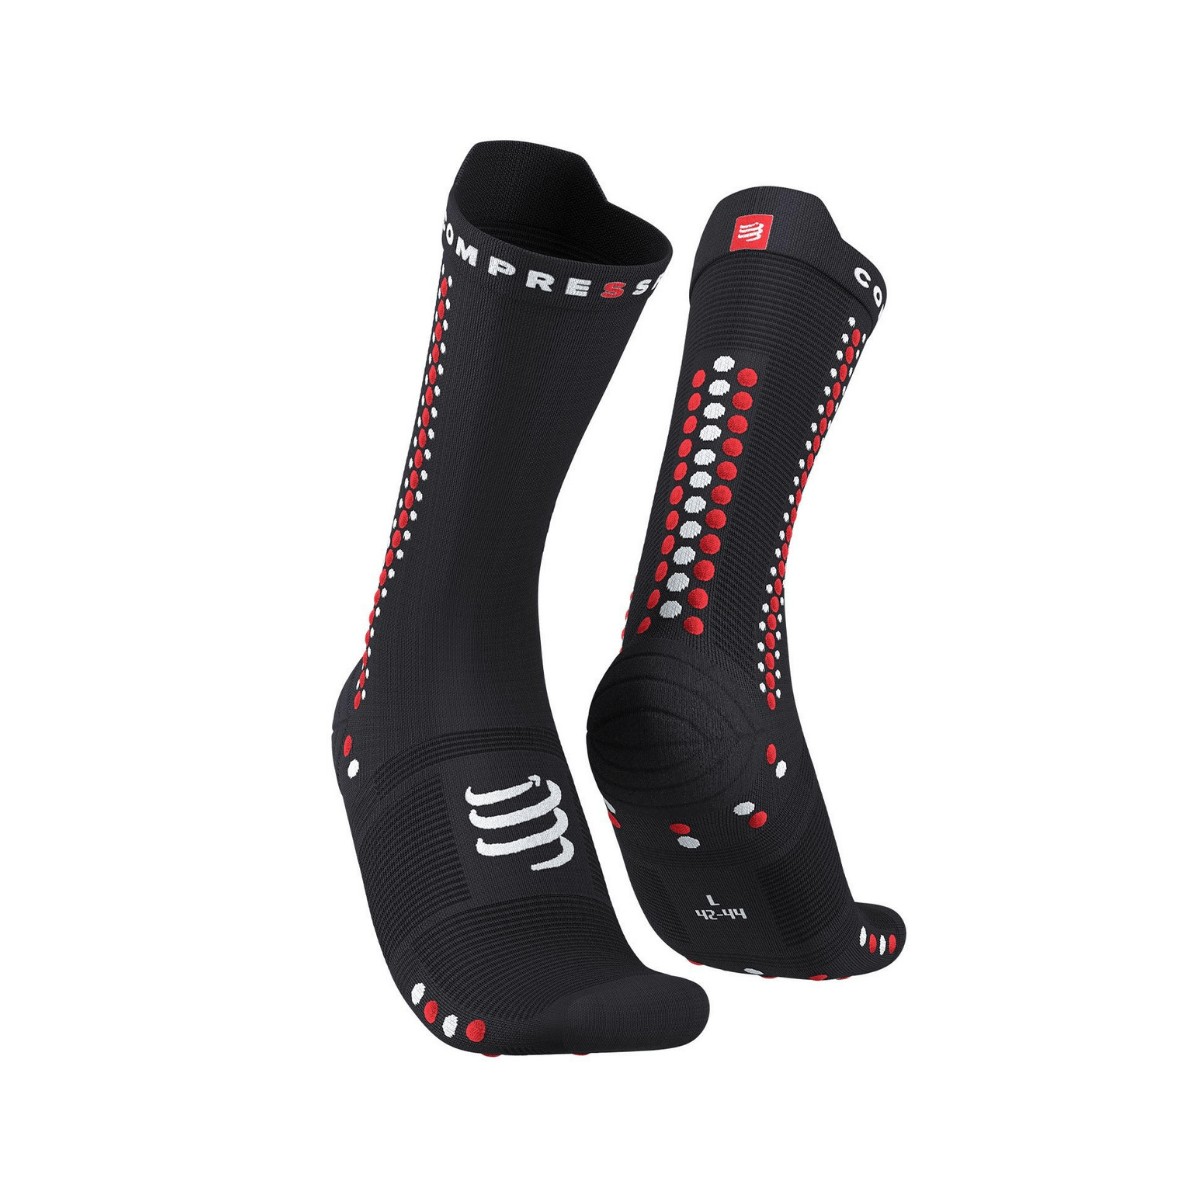 Chaussettes Pro Racing V4.0 Bike Noir Rouge, Taille Taille 1